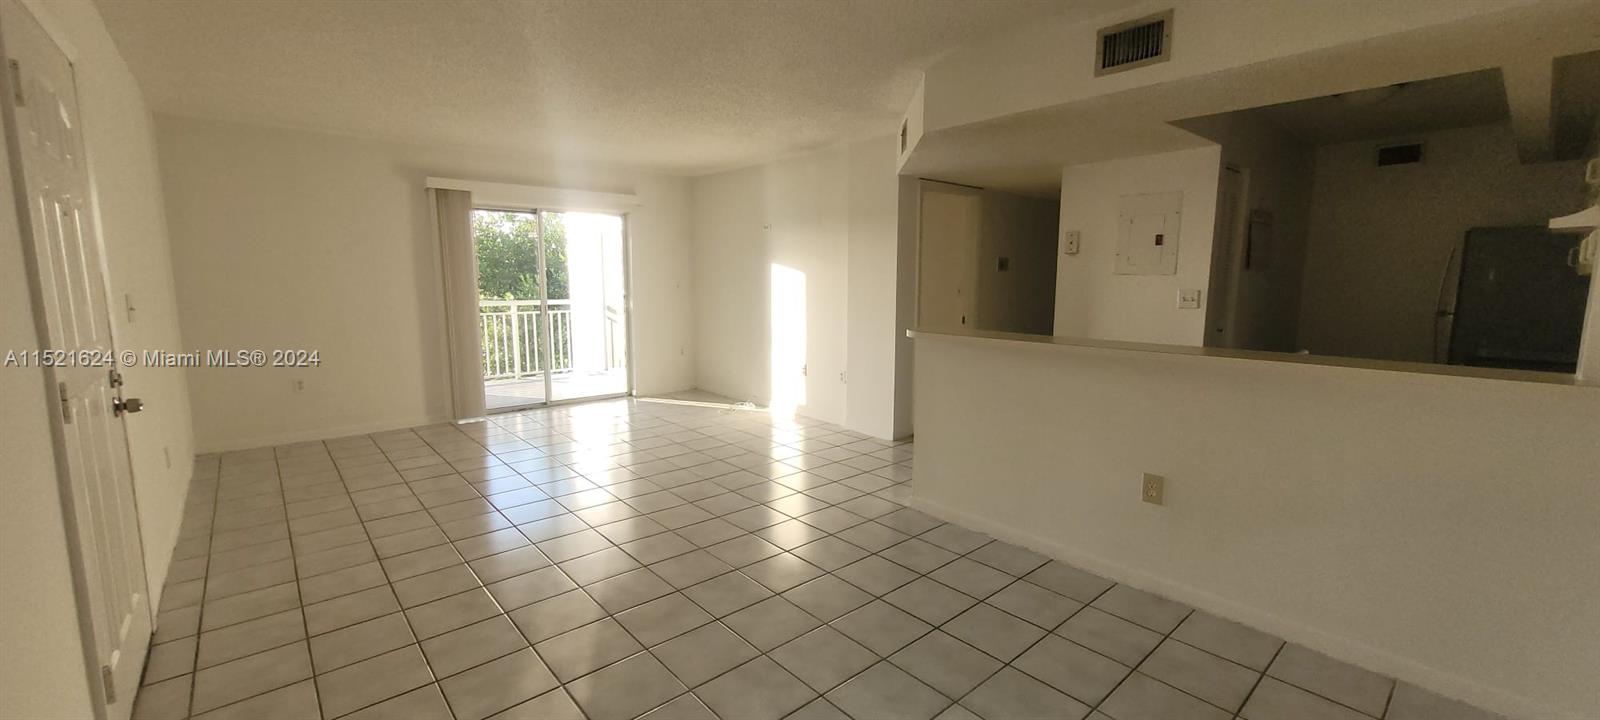 8580 SW 212th St #301 For Sale A11521624, FL